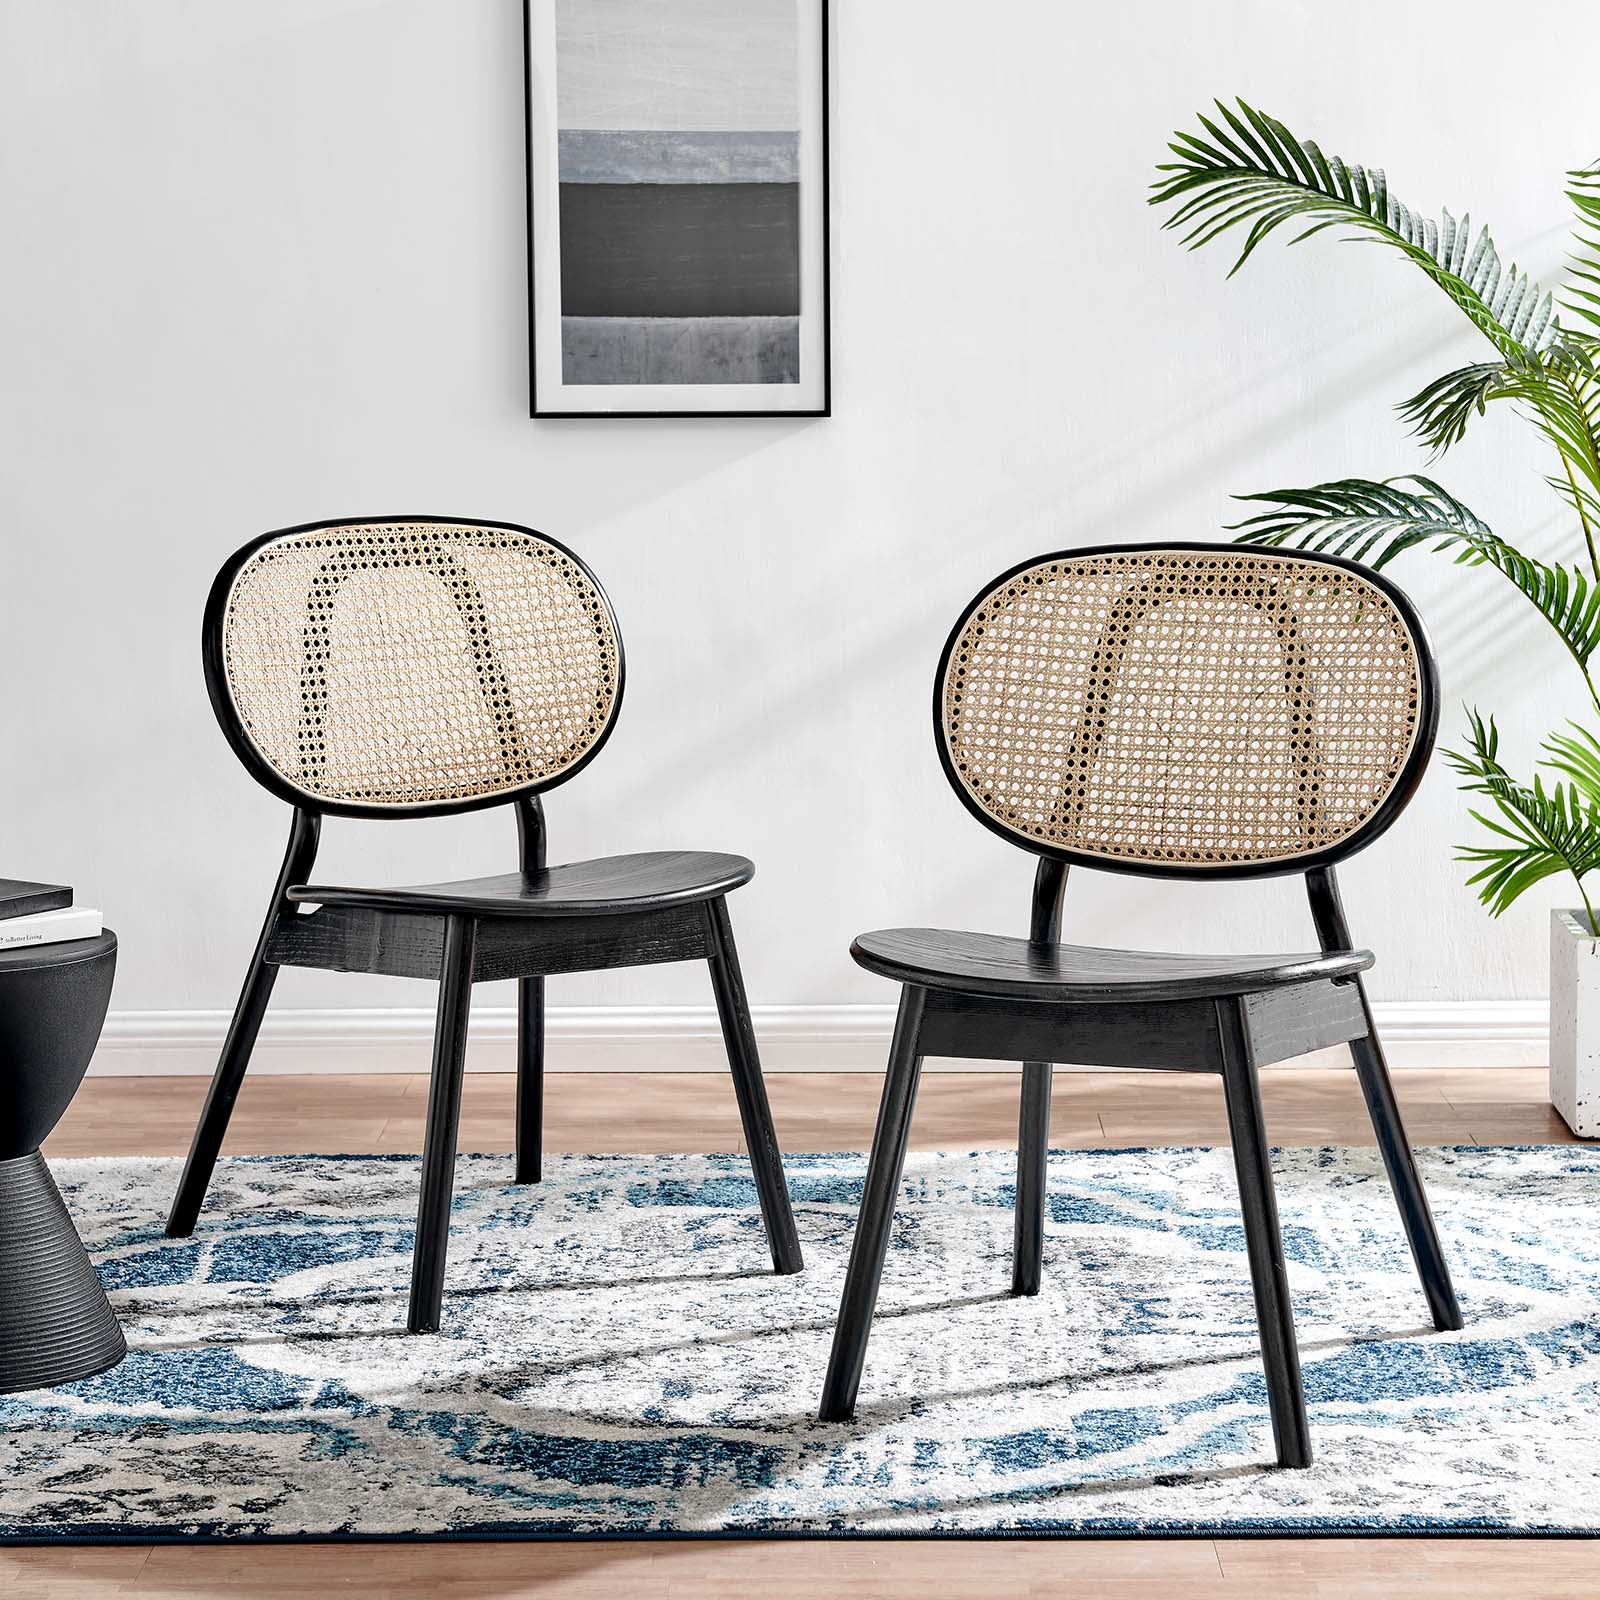 Malina Wood Dining Side Chair Set of 2 - East Shore Modern Home Furnishings